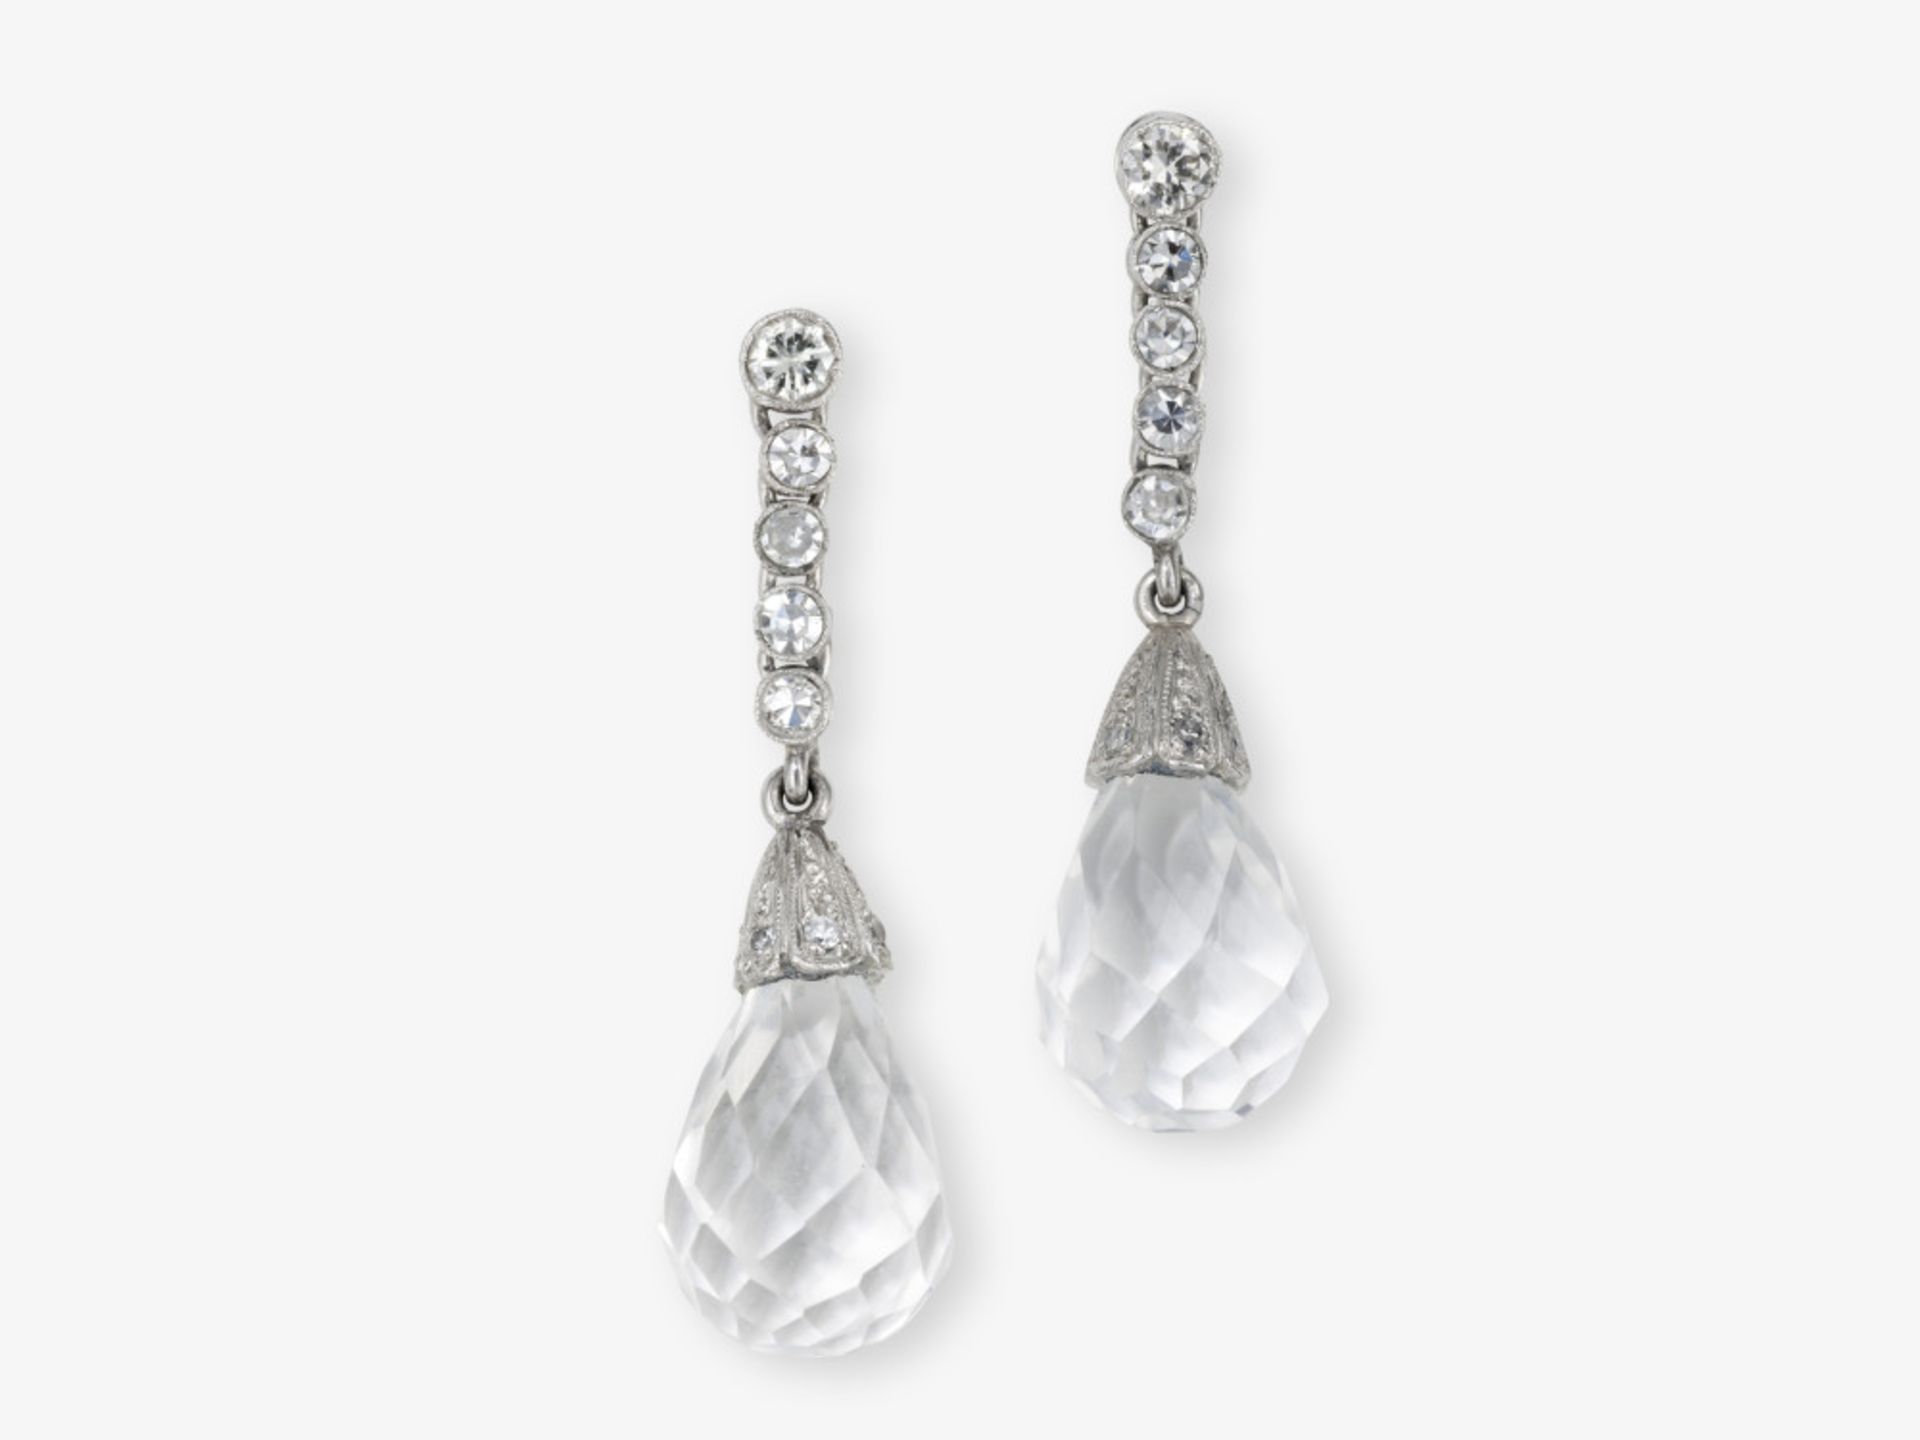 Historical drop earrings decorated with diamonds with rock crystal drops - America, 1920s - 1930s